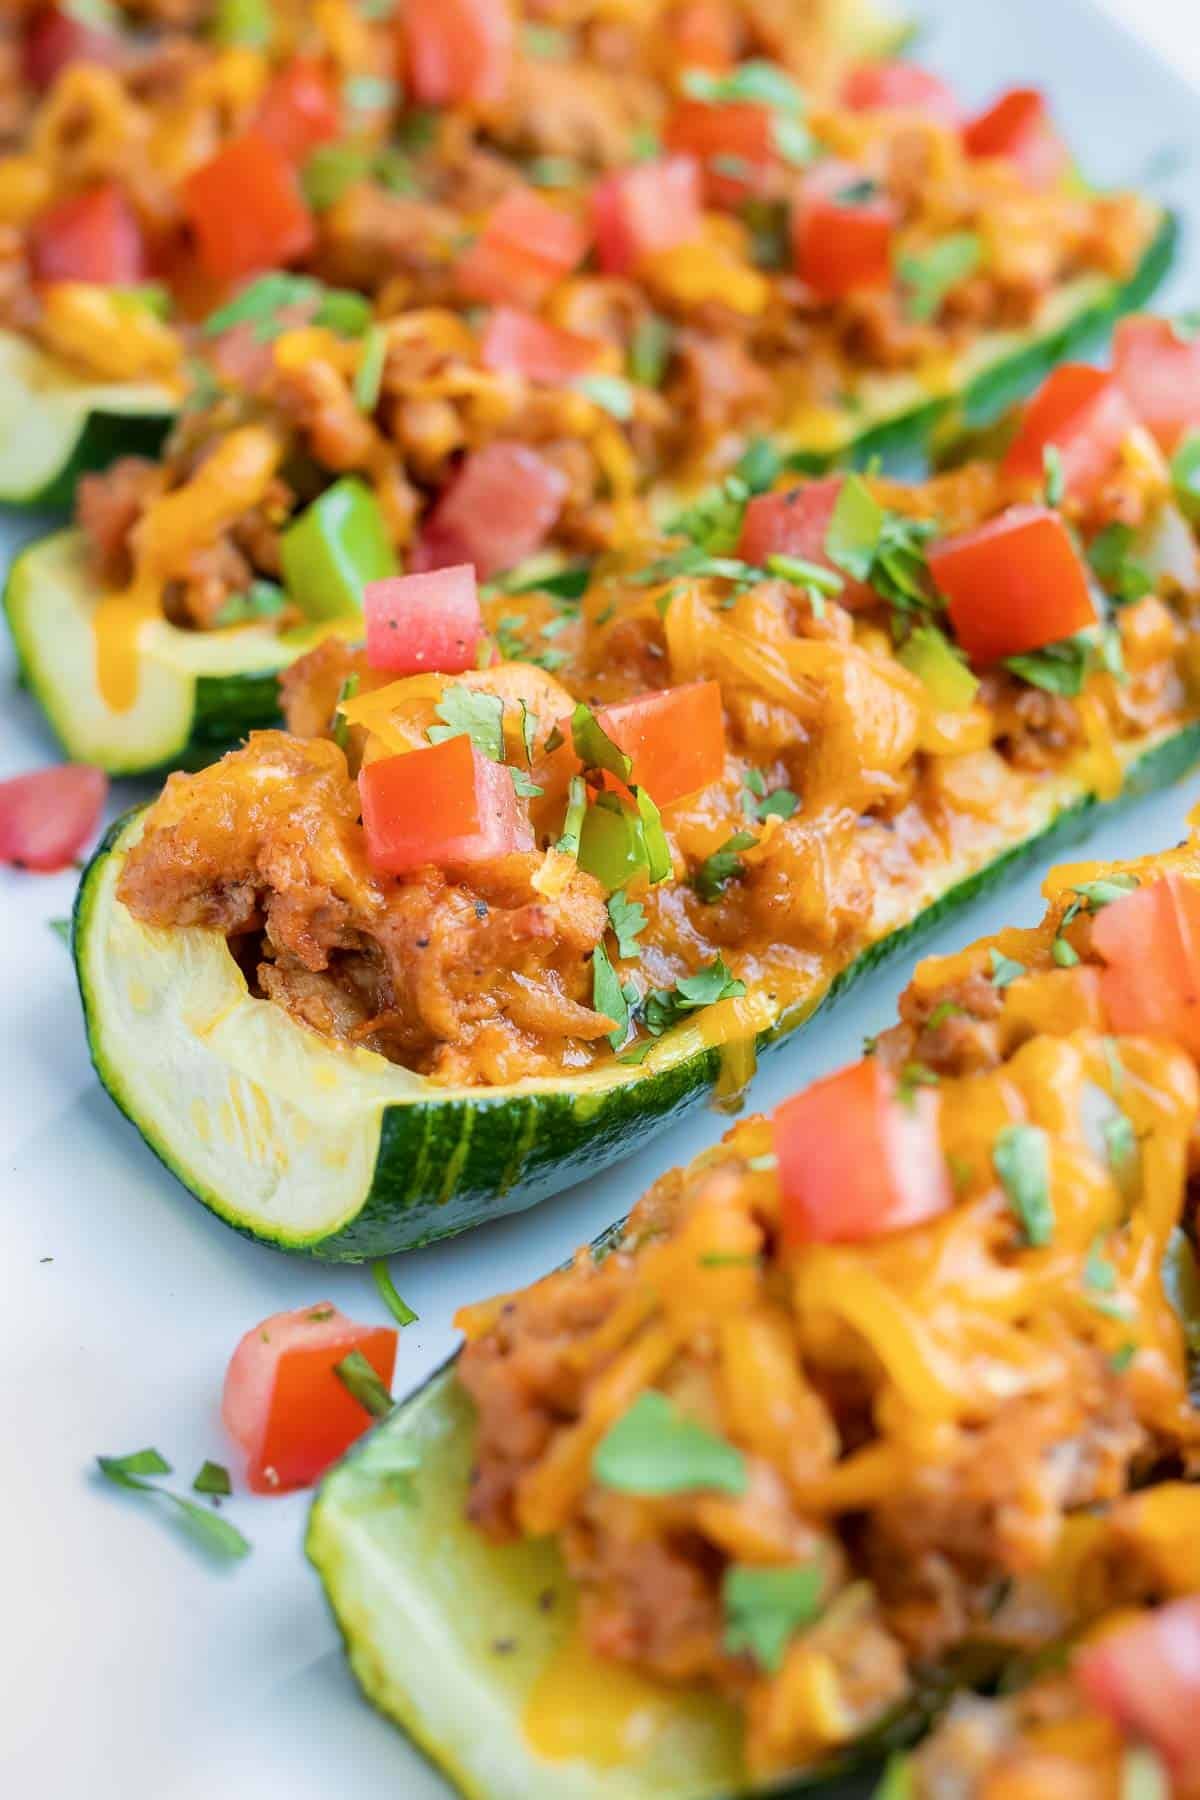 A zucchini squash that has been made into a boat and stuffed with ground beef and taco filling.